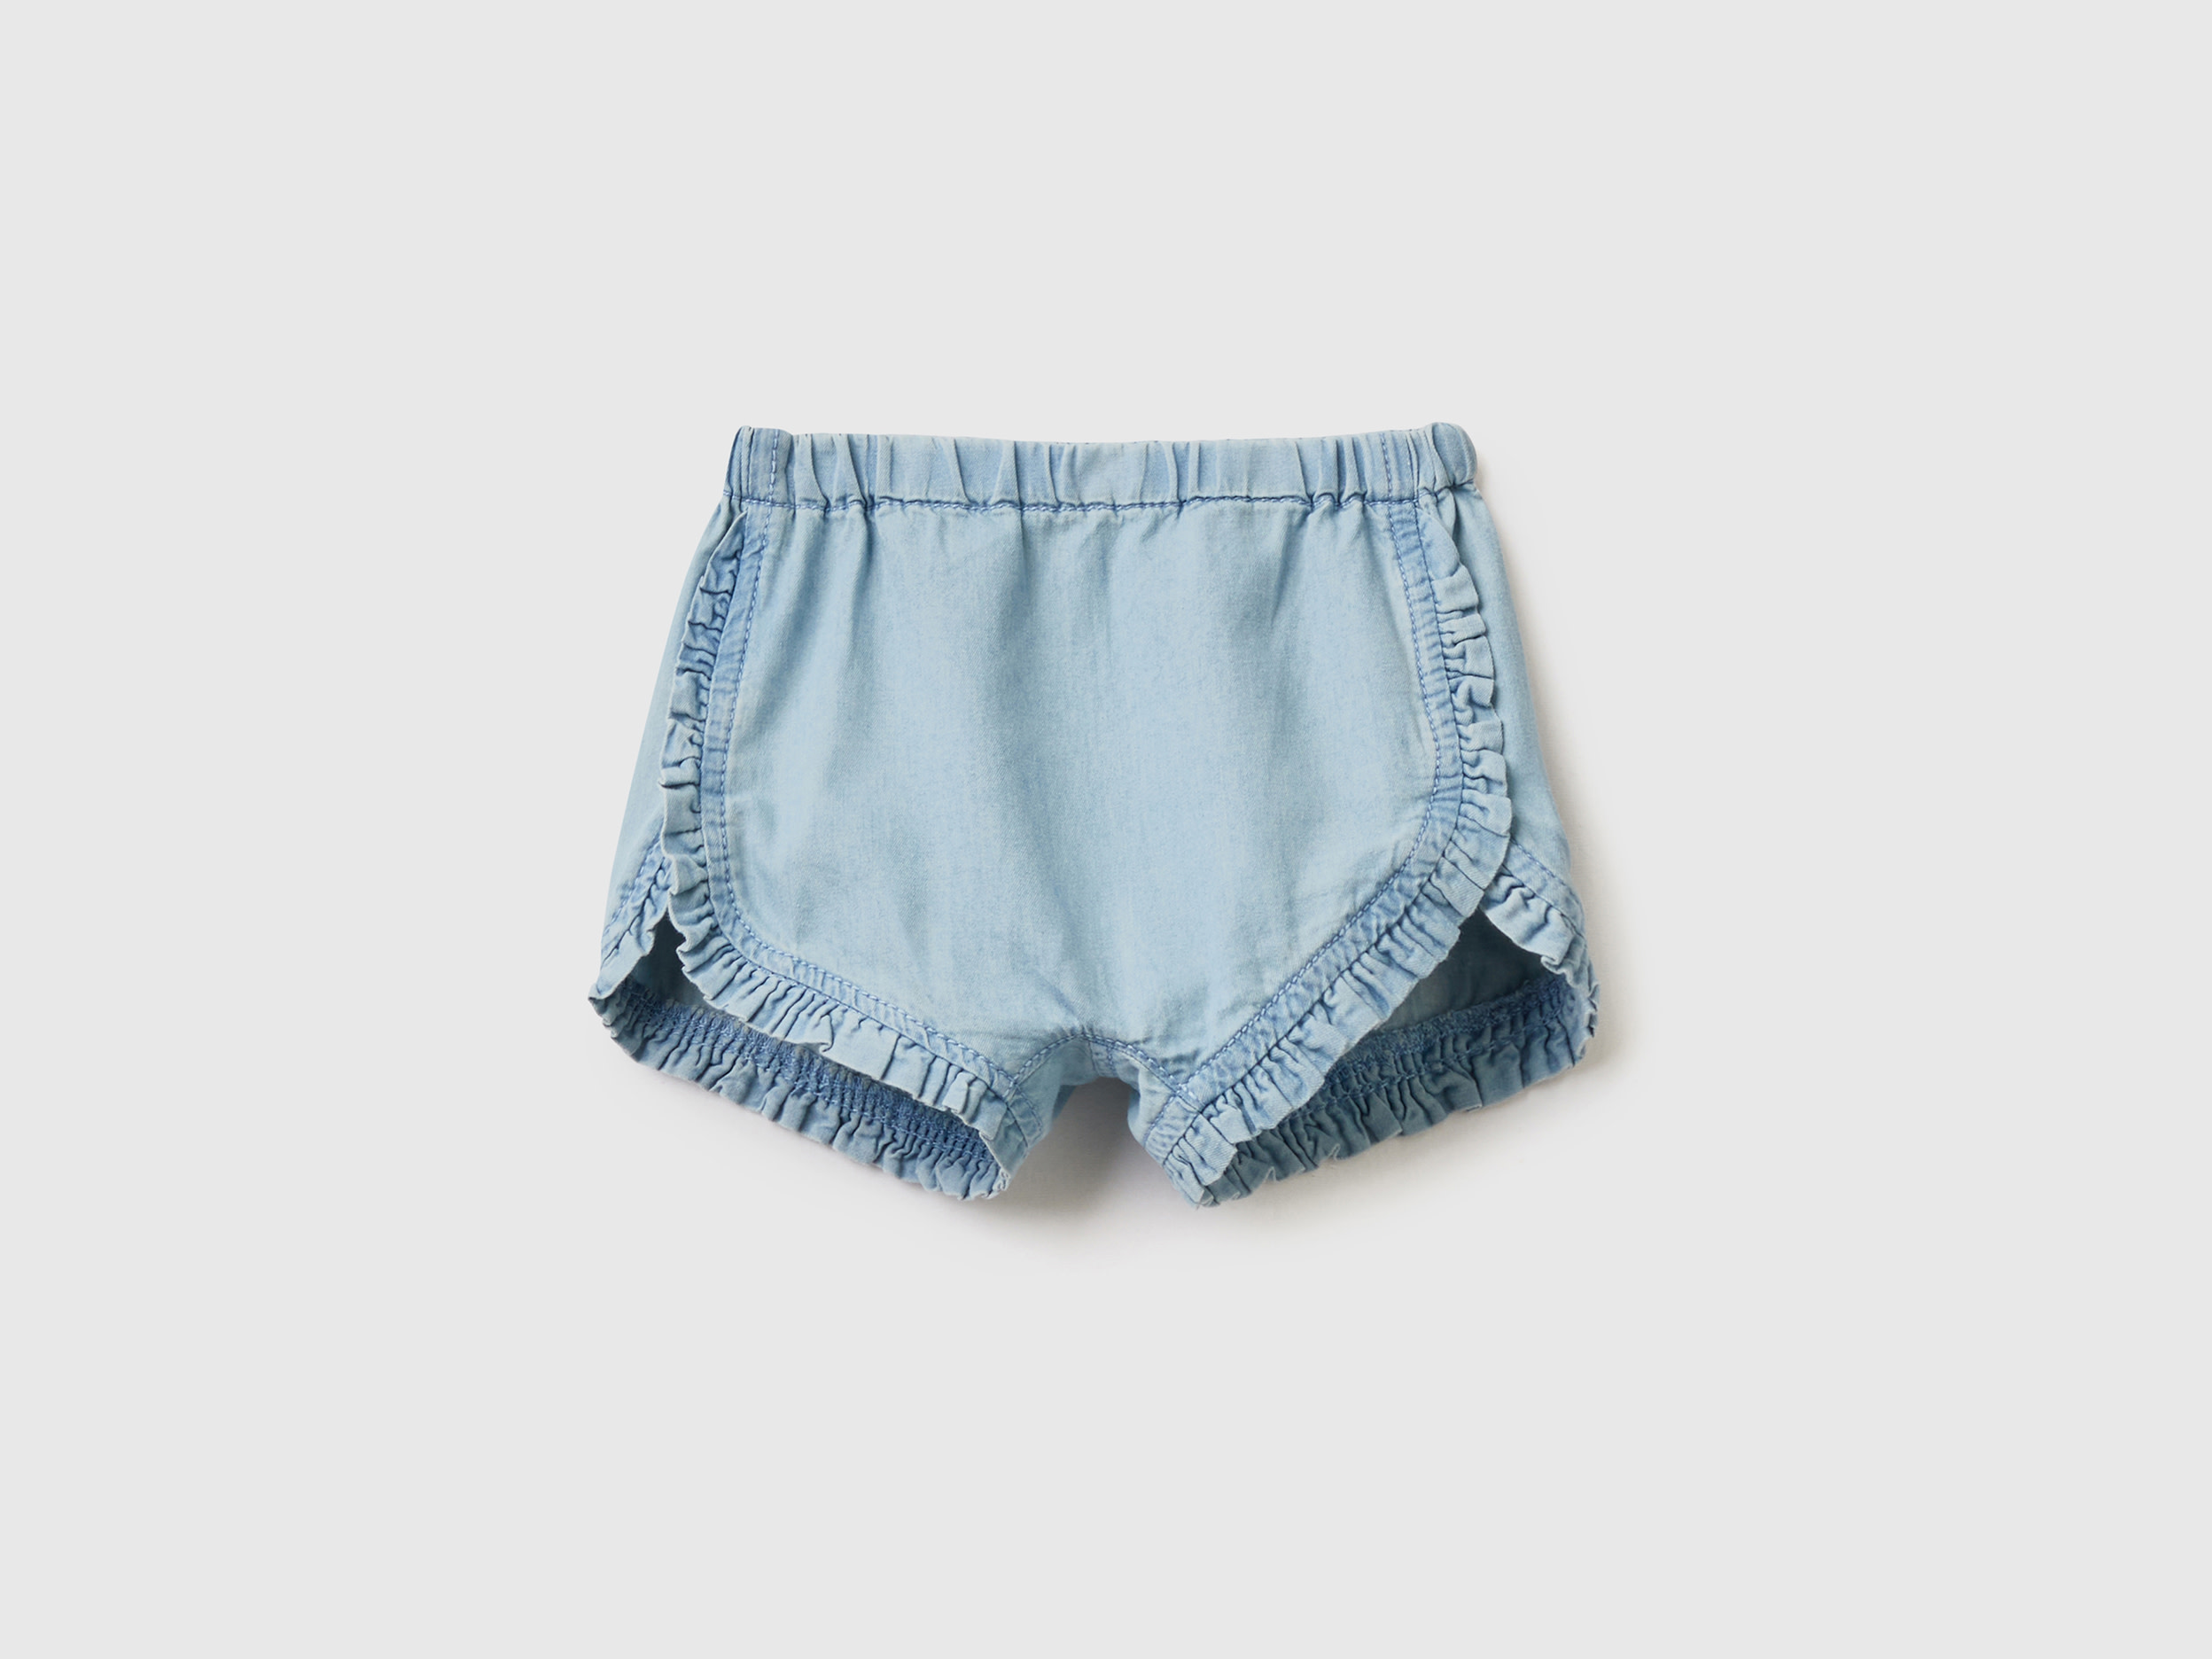 Benetton, Shorts With Rouches, size 6-9, Sky Blue, Kids